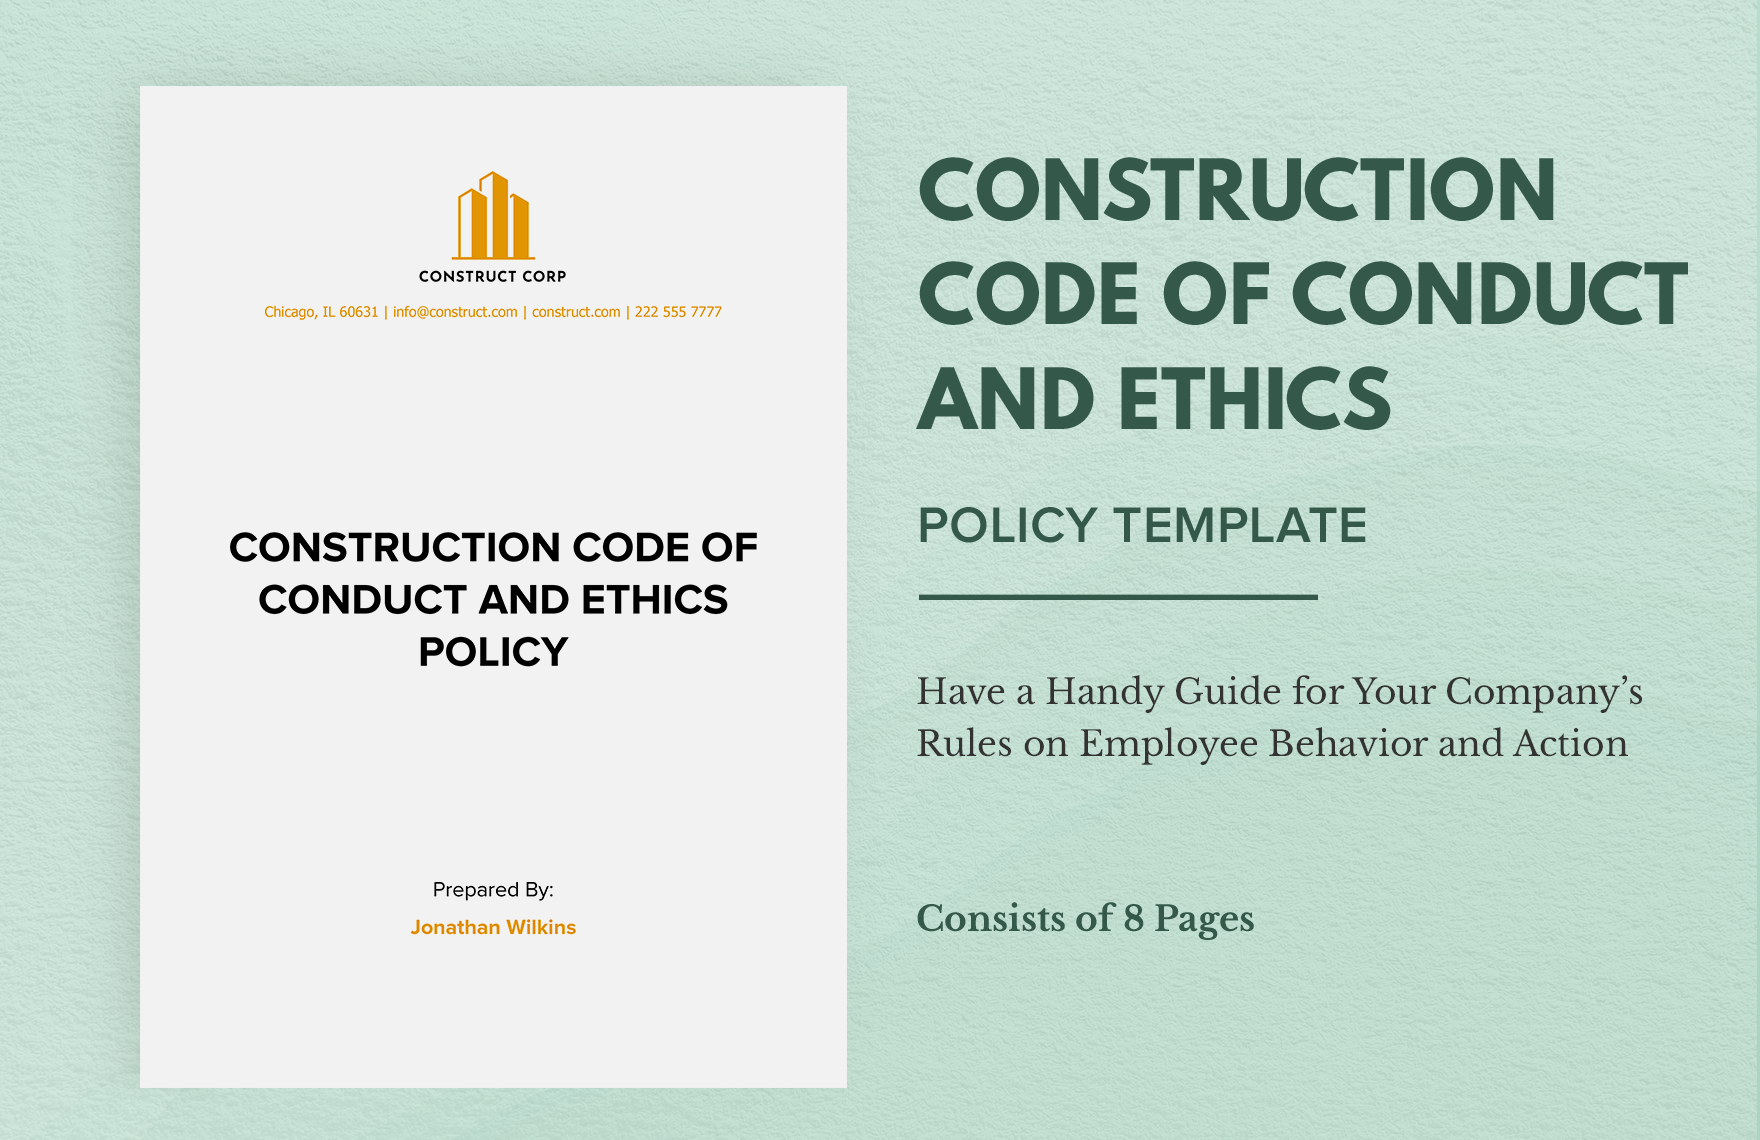 Construction Code of Conduct and Ethics Policy Template